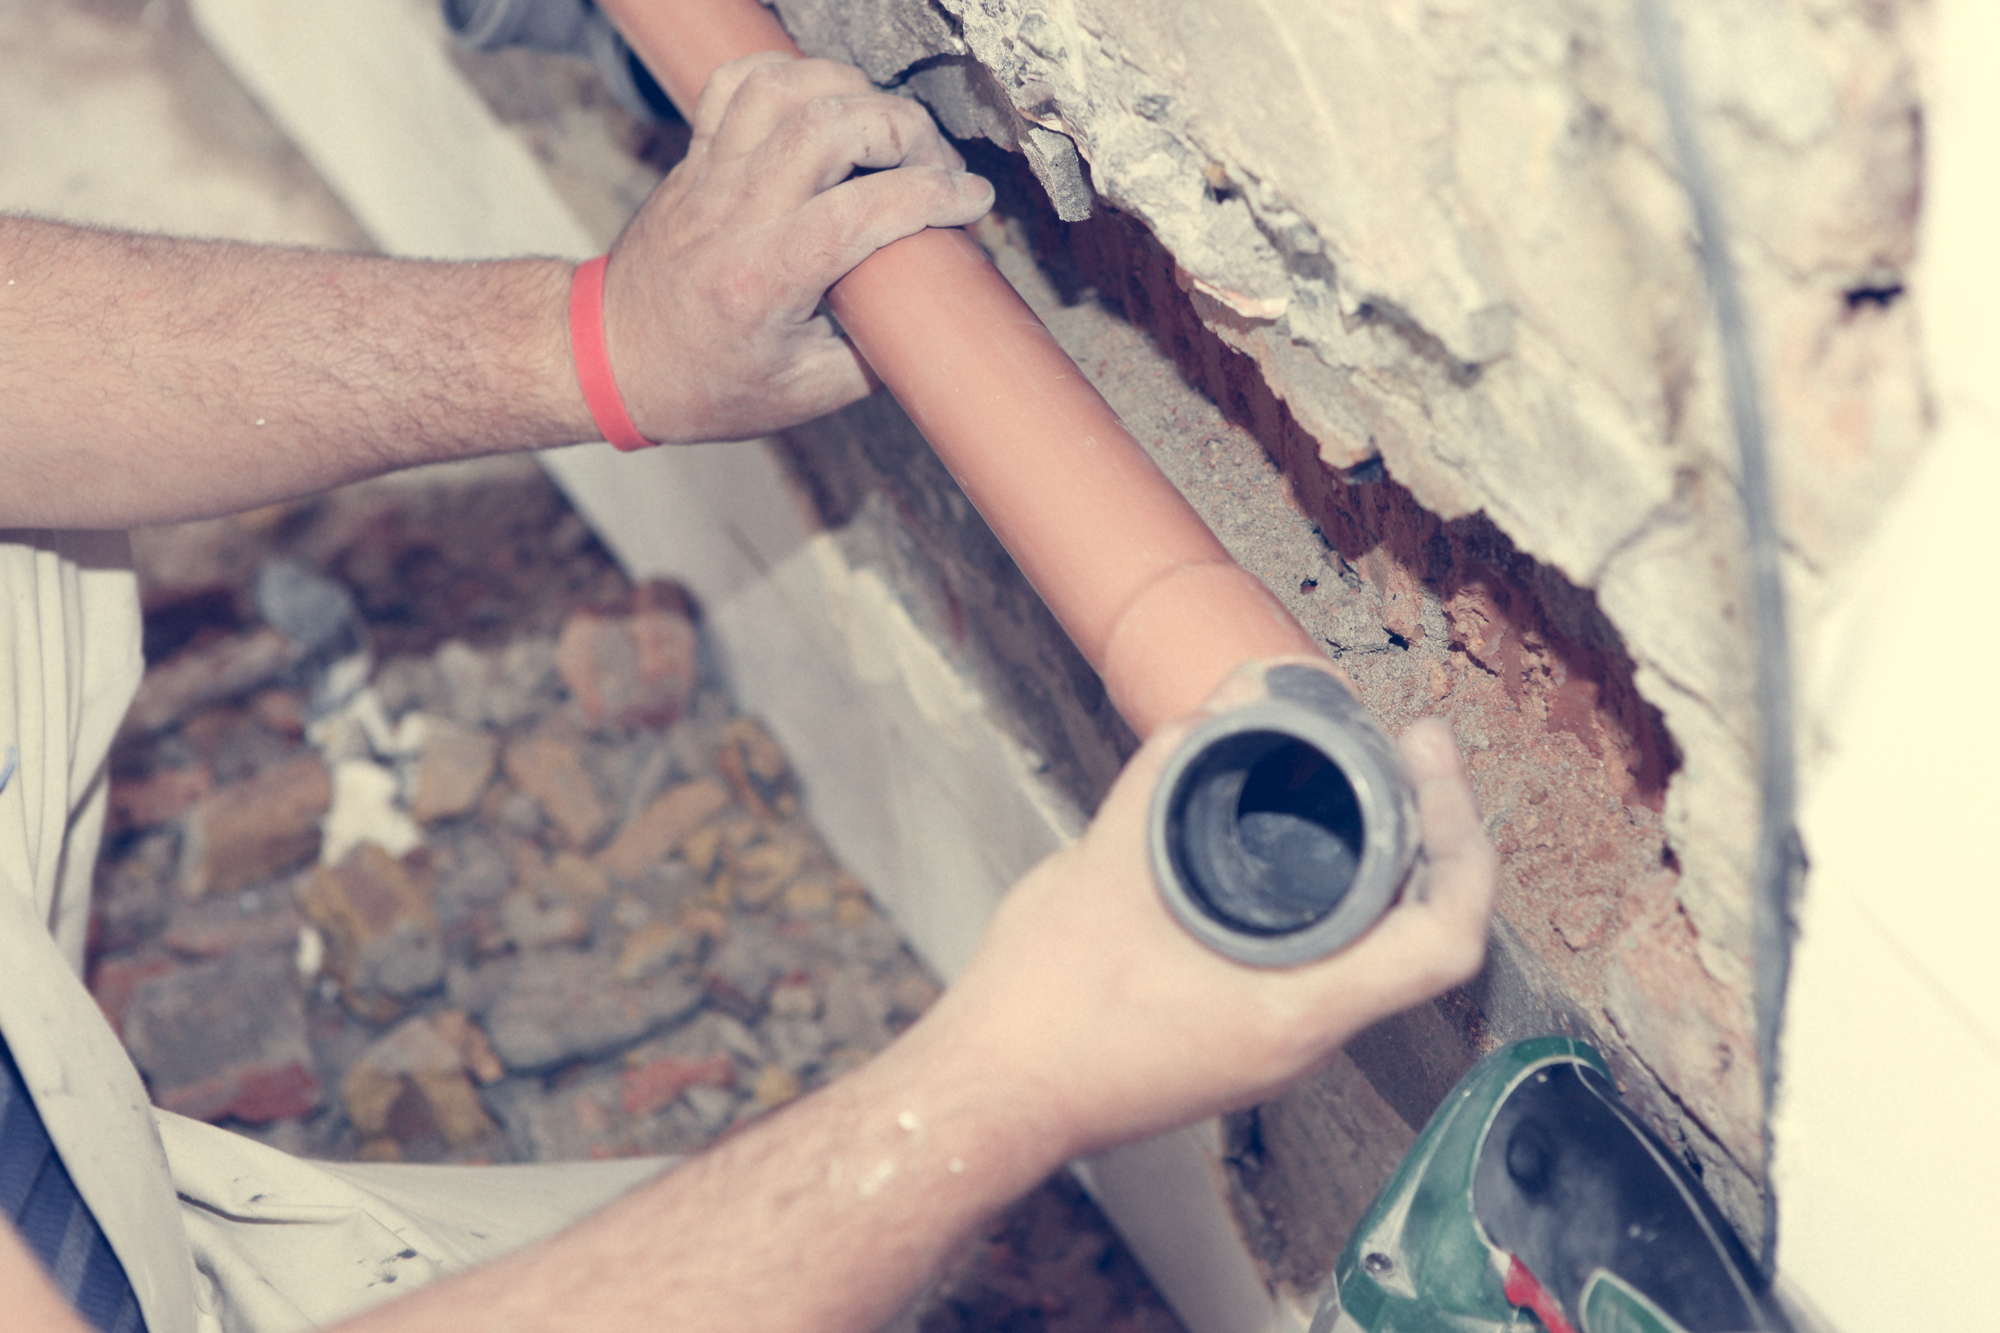 The Top 5 Plumbing Services Everyone Should Know About